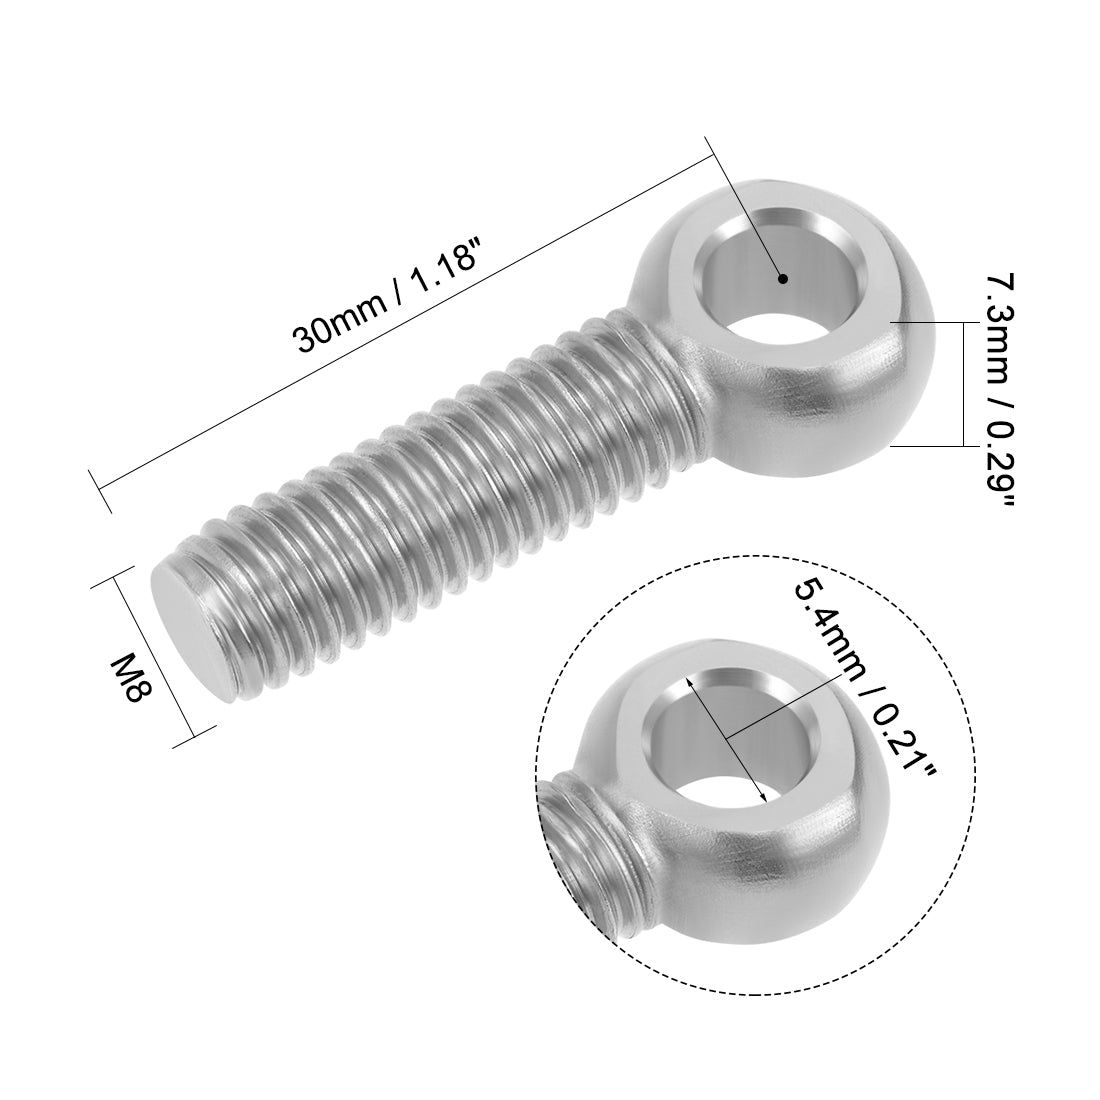 uxcell Uxcell M8 x 30mm Machinery Shoulder Swing Lifting Eye Bolt 304 Stainless Steel Metric Thread 4pcs